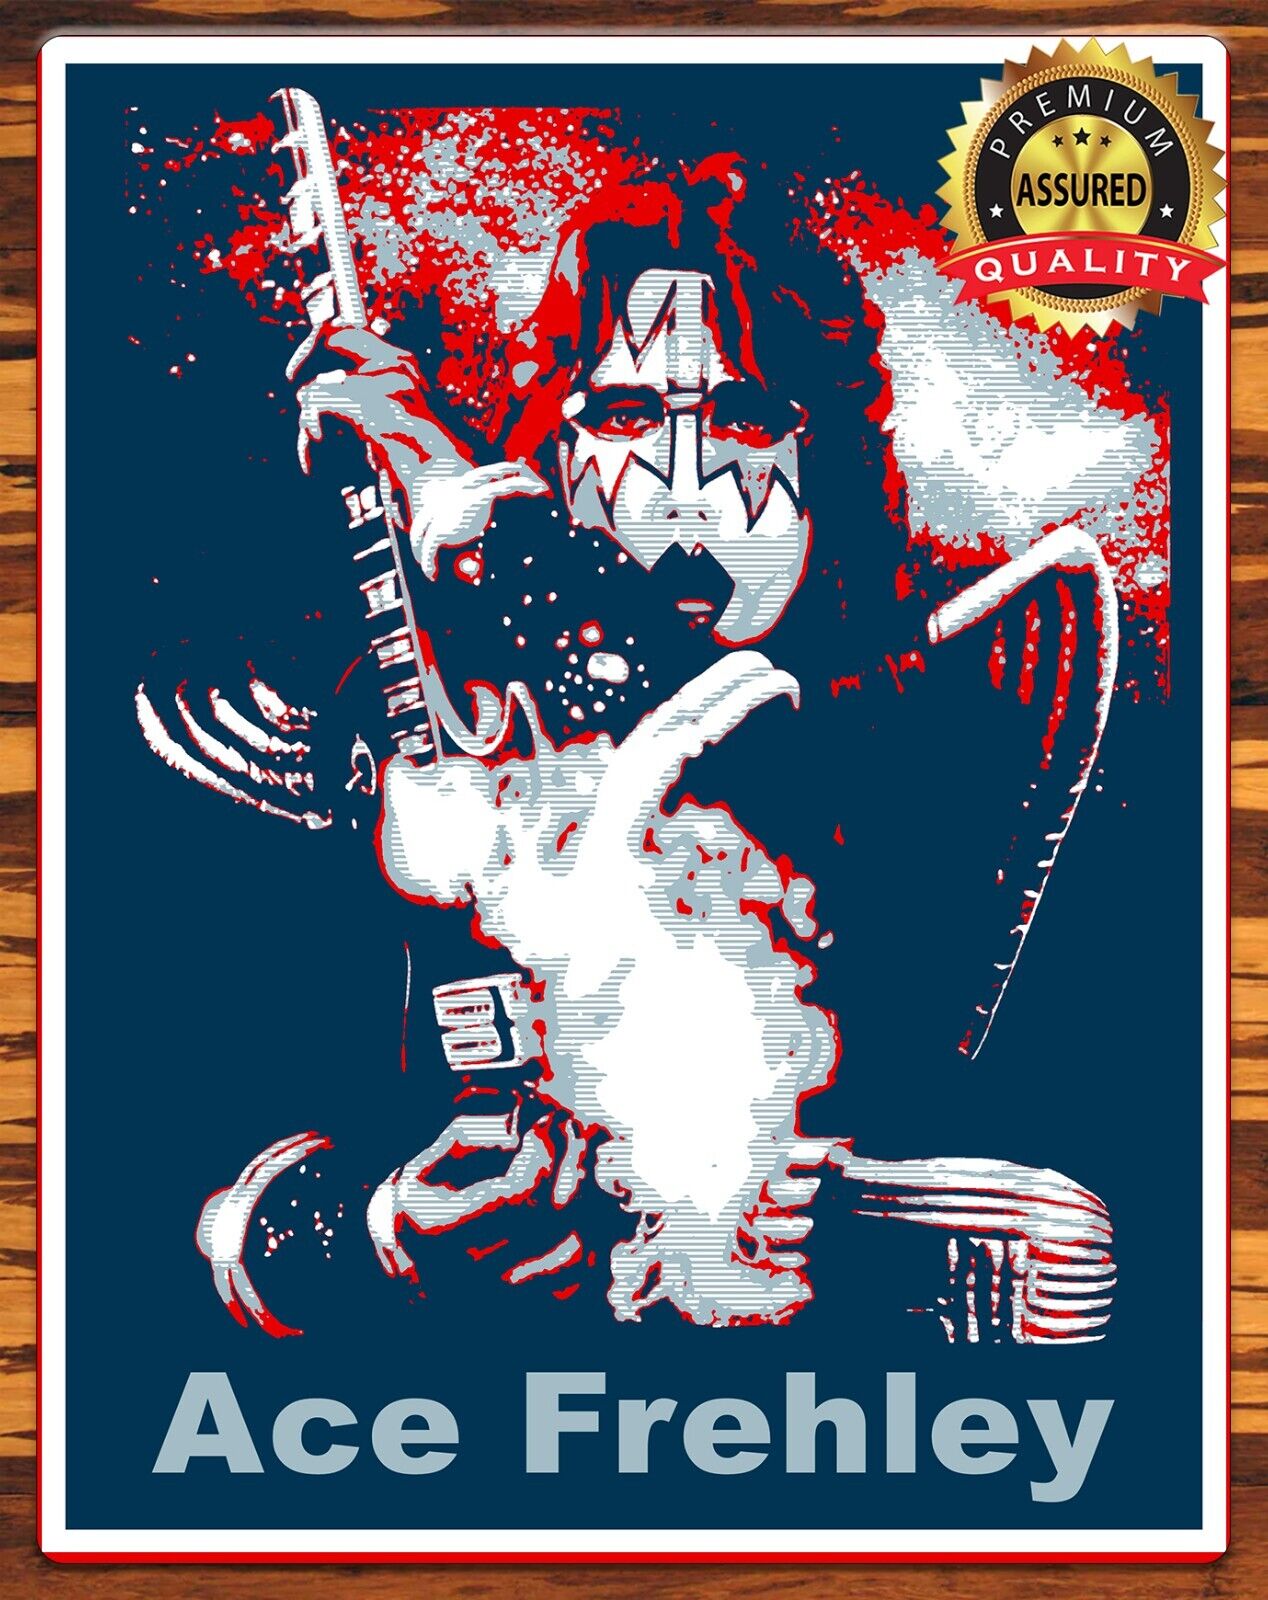 Ace Frehley - Kiss - Metal Sign 11 x 14